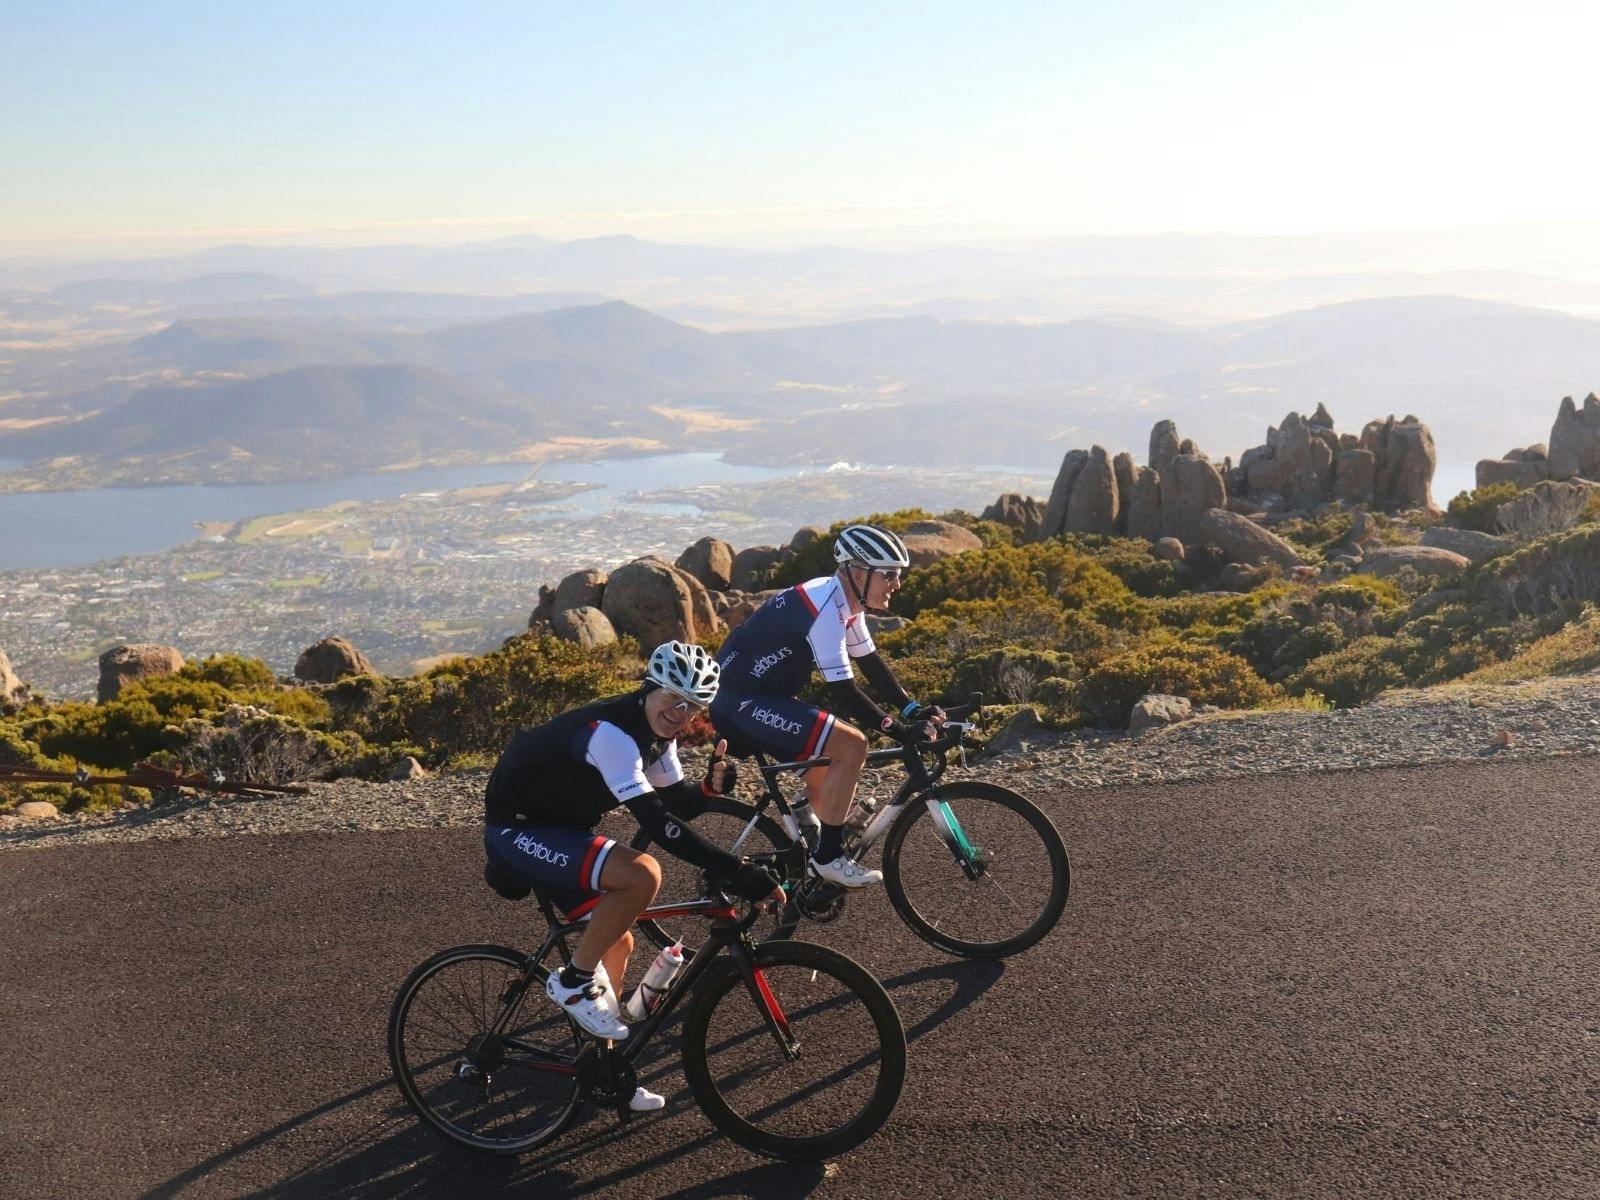 men on bikes looking at camera as they ride to top of mountain with city backdrop in background